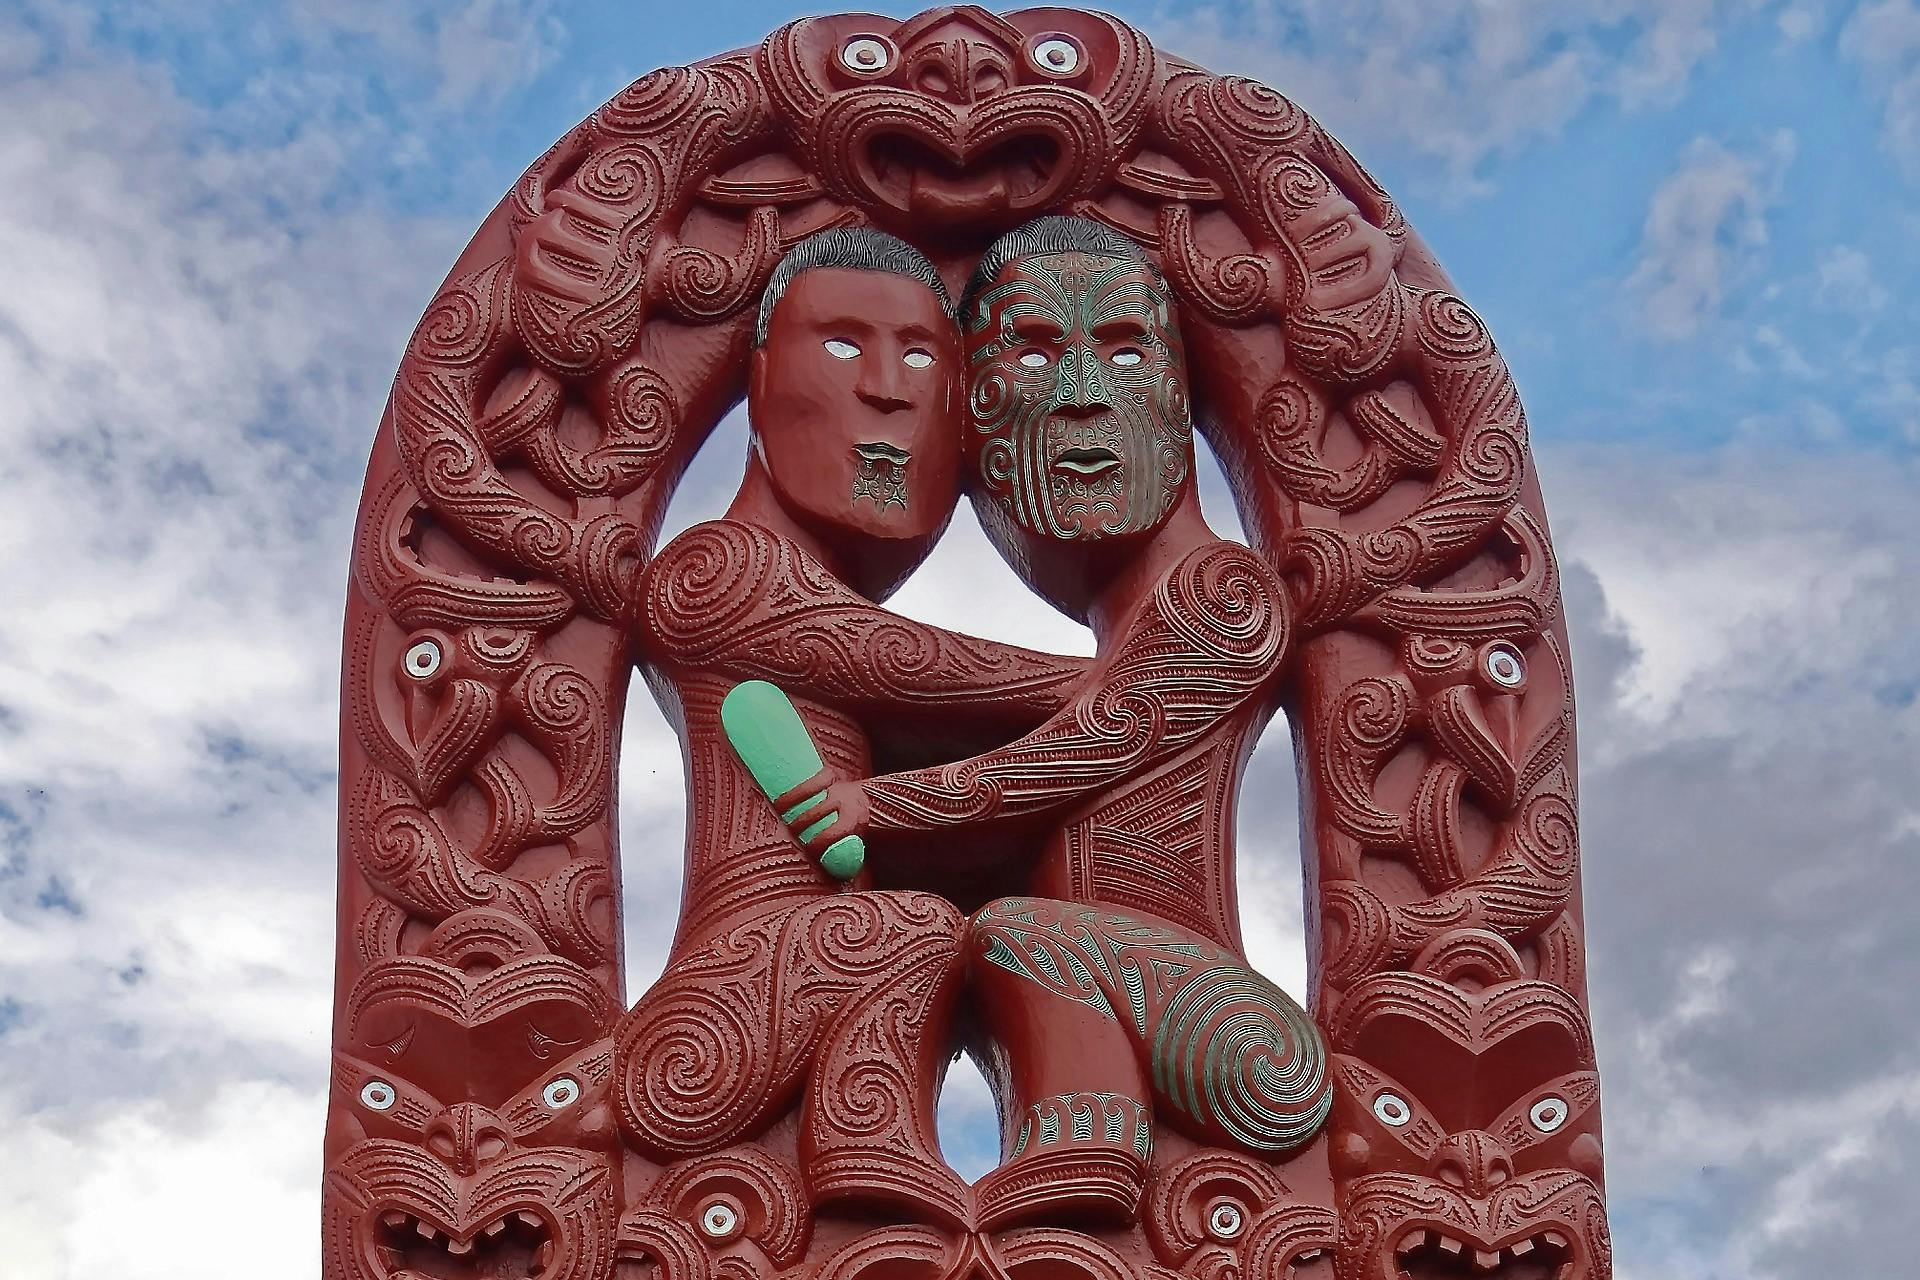 10 Ways To Experience Maori Culture In New Zealand